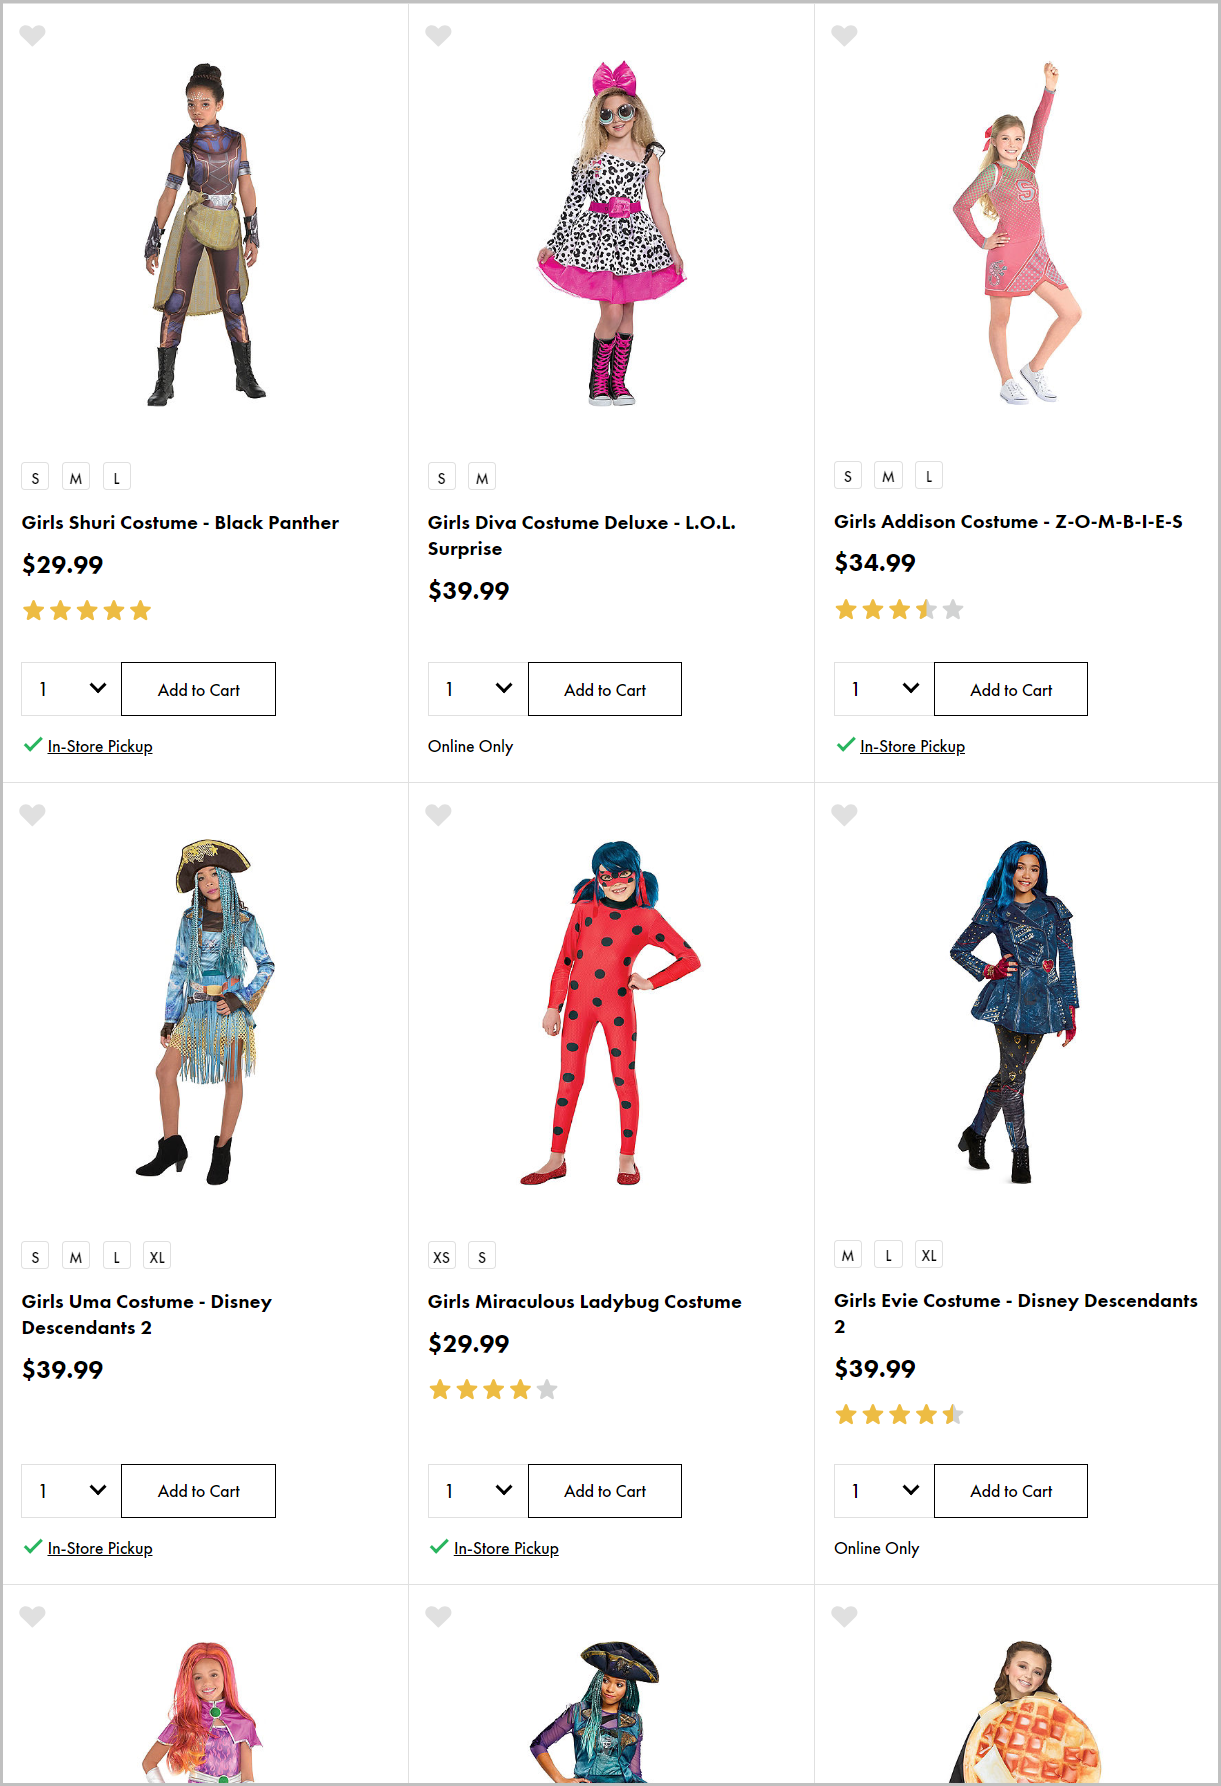 A category page on PartyCity.com - some products have star ratings, while others have none. 